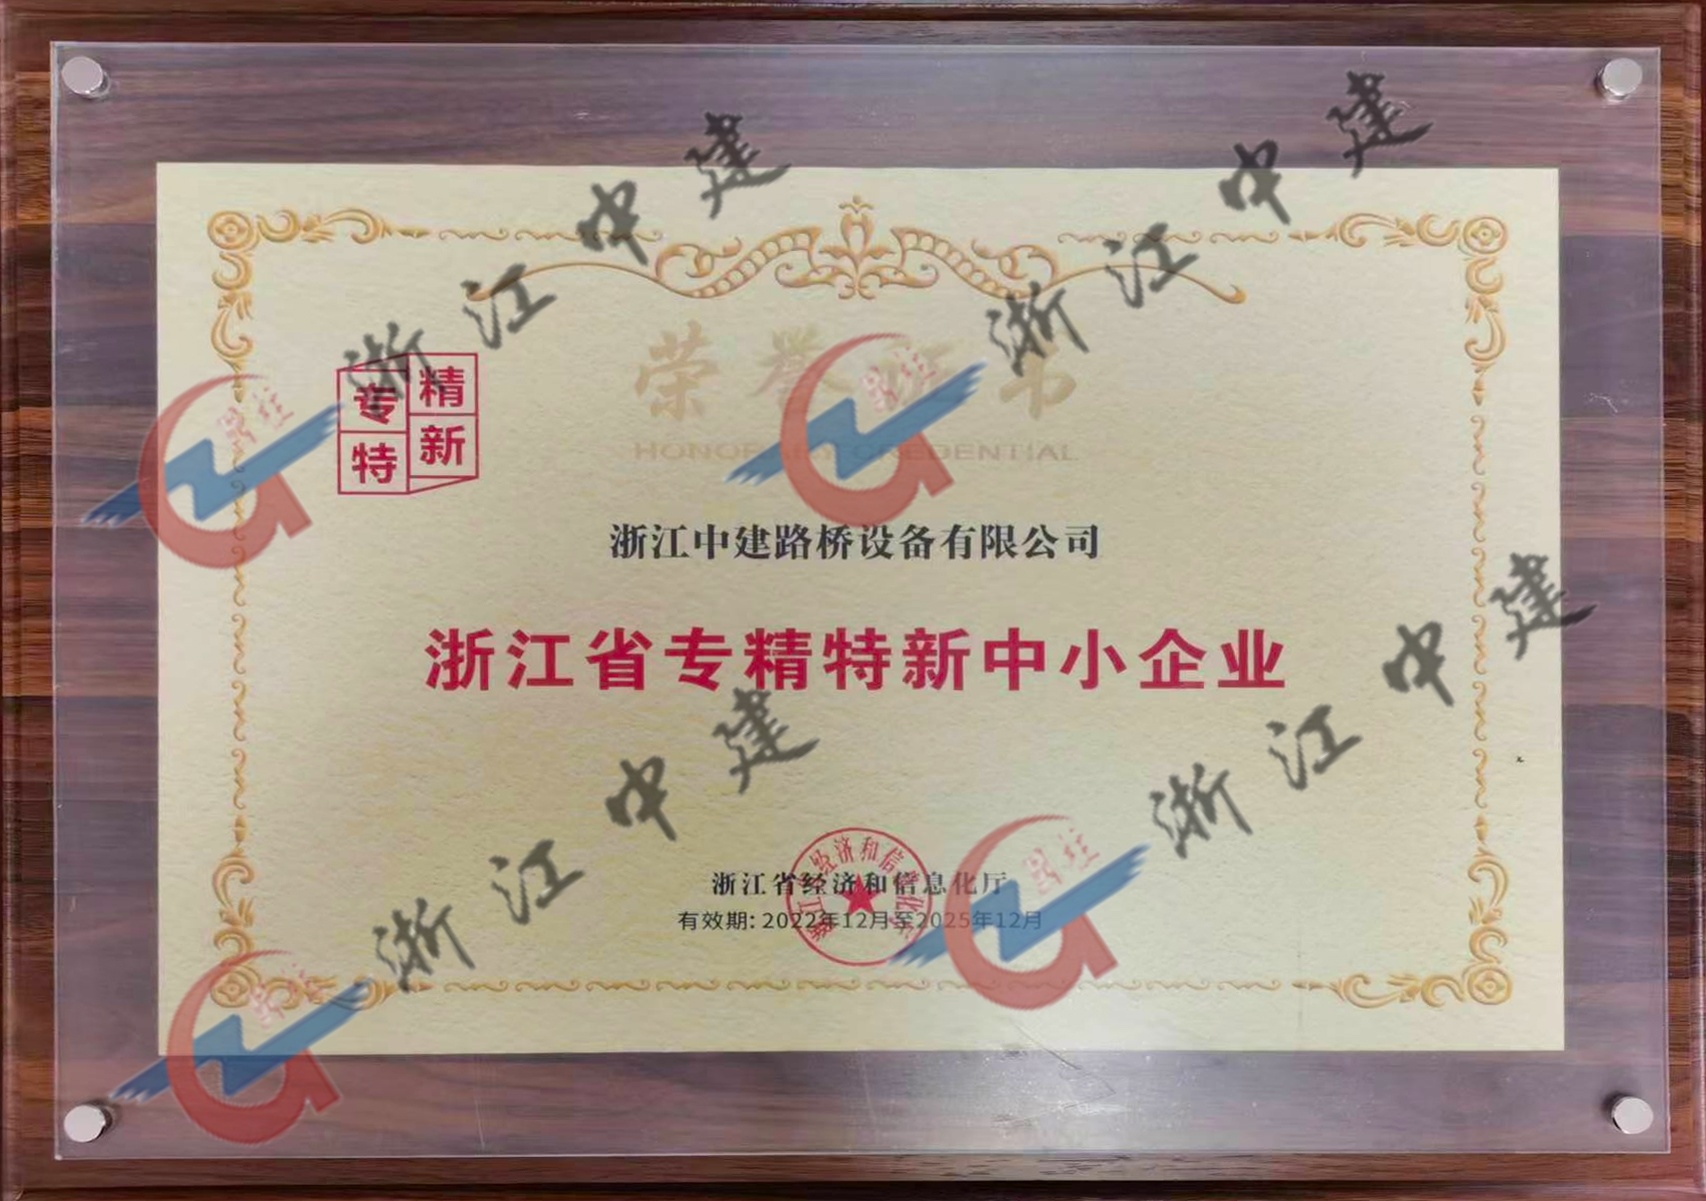 Specialized and Special New Small and Medium-sized Enterprises in Zhejiang Province